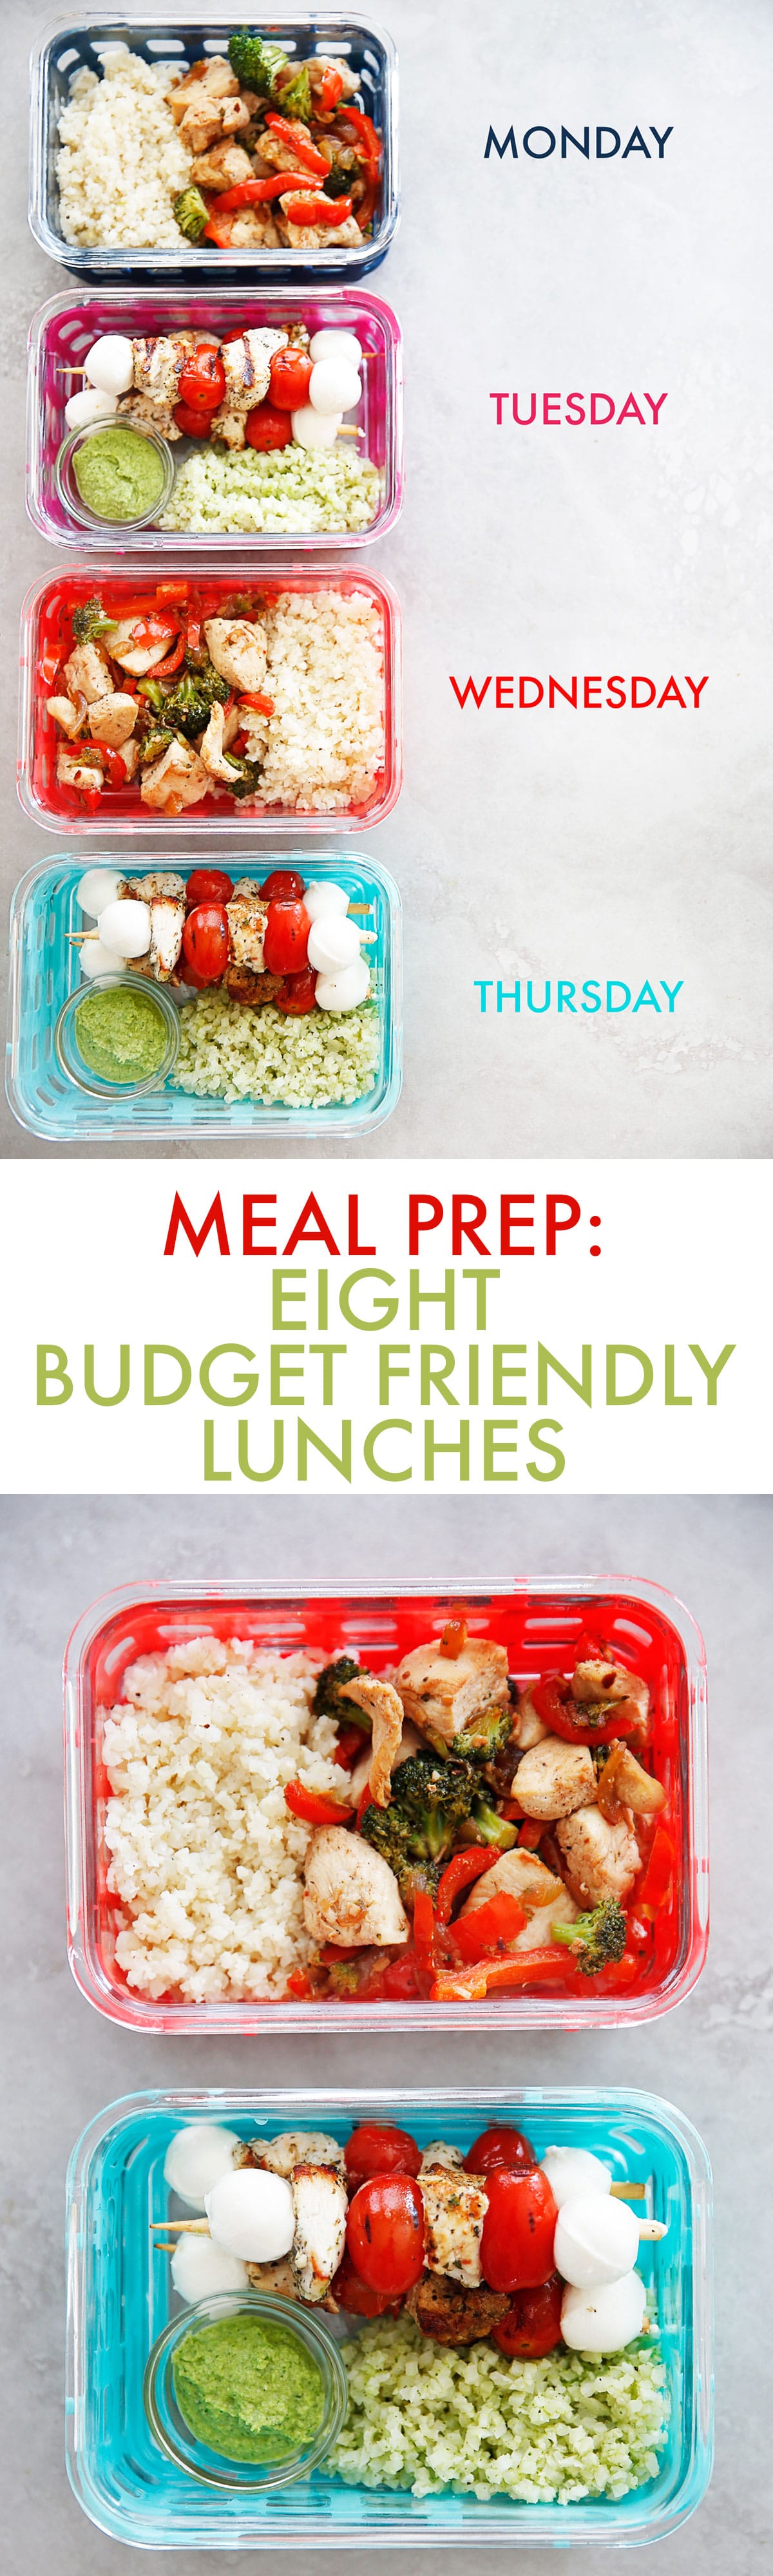 meal prep: 8 budget friendly lunches